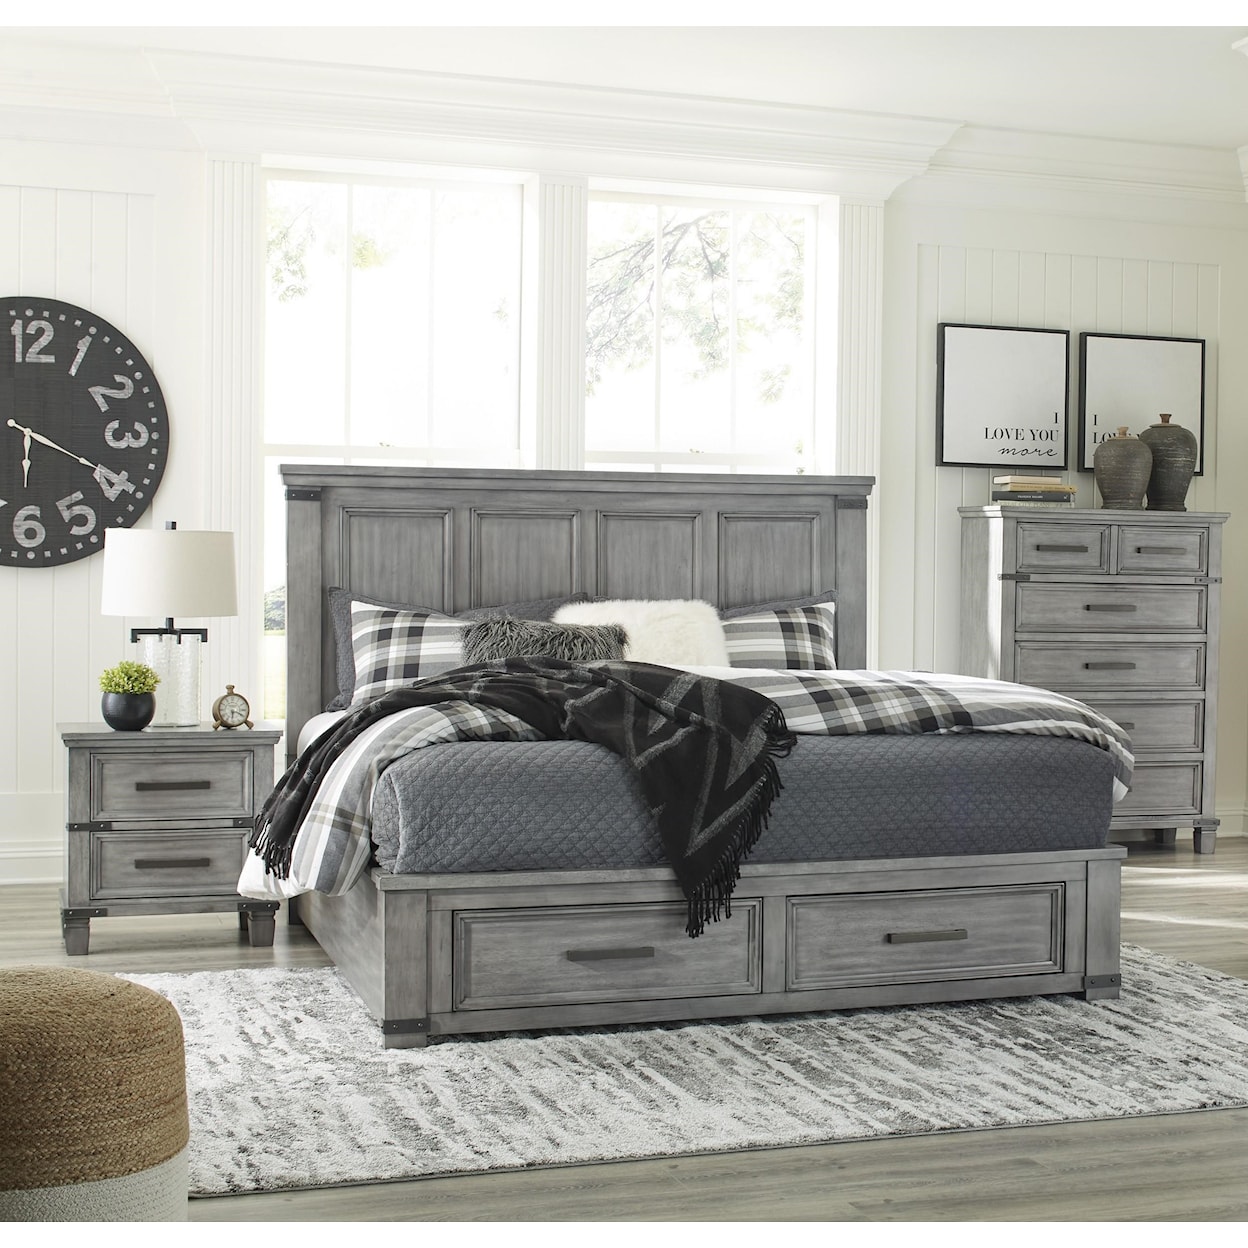 Signature Design by Ashley Russelyn 5 Piece Queen Bedroom Set